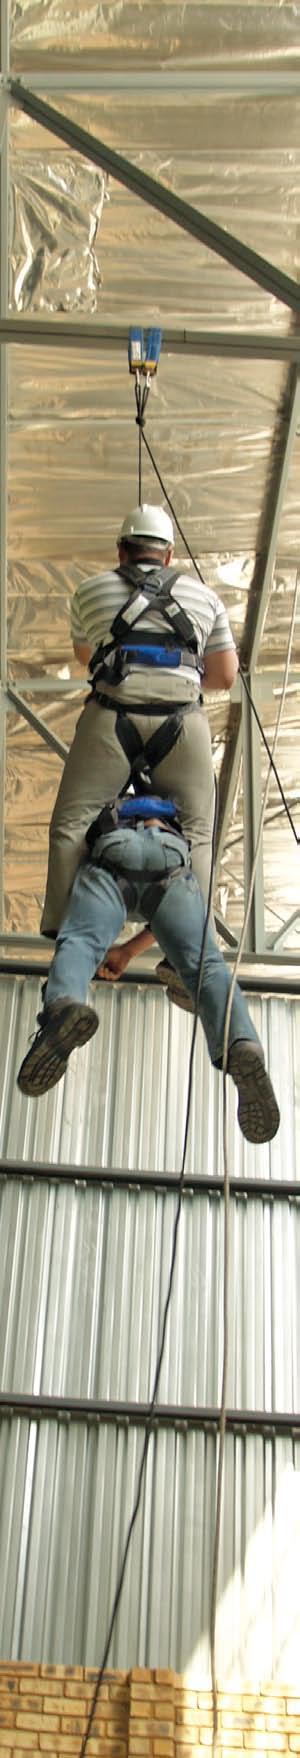 Accredited Training Introduction to Working at Heights - US: 229998 1 Day training 20 Students per course Unit standard (Services SETA & ETQA) 229998 - Perform fall arrest techniques for working at